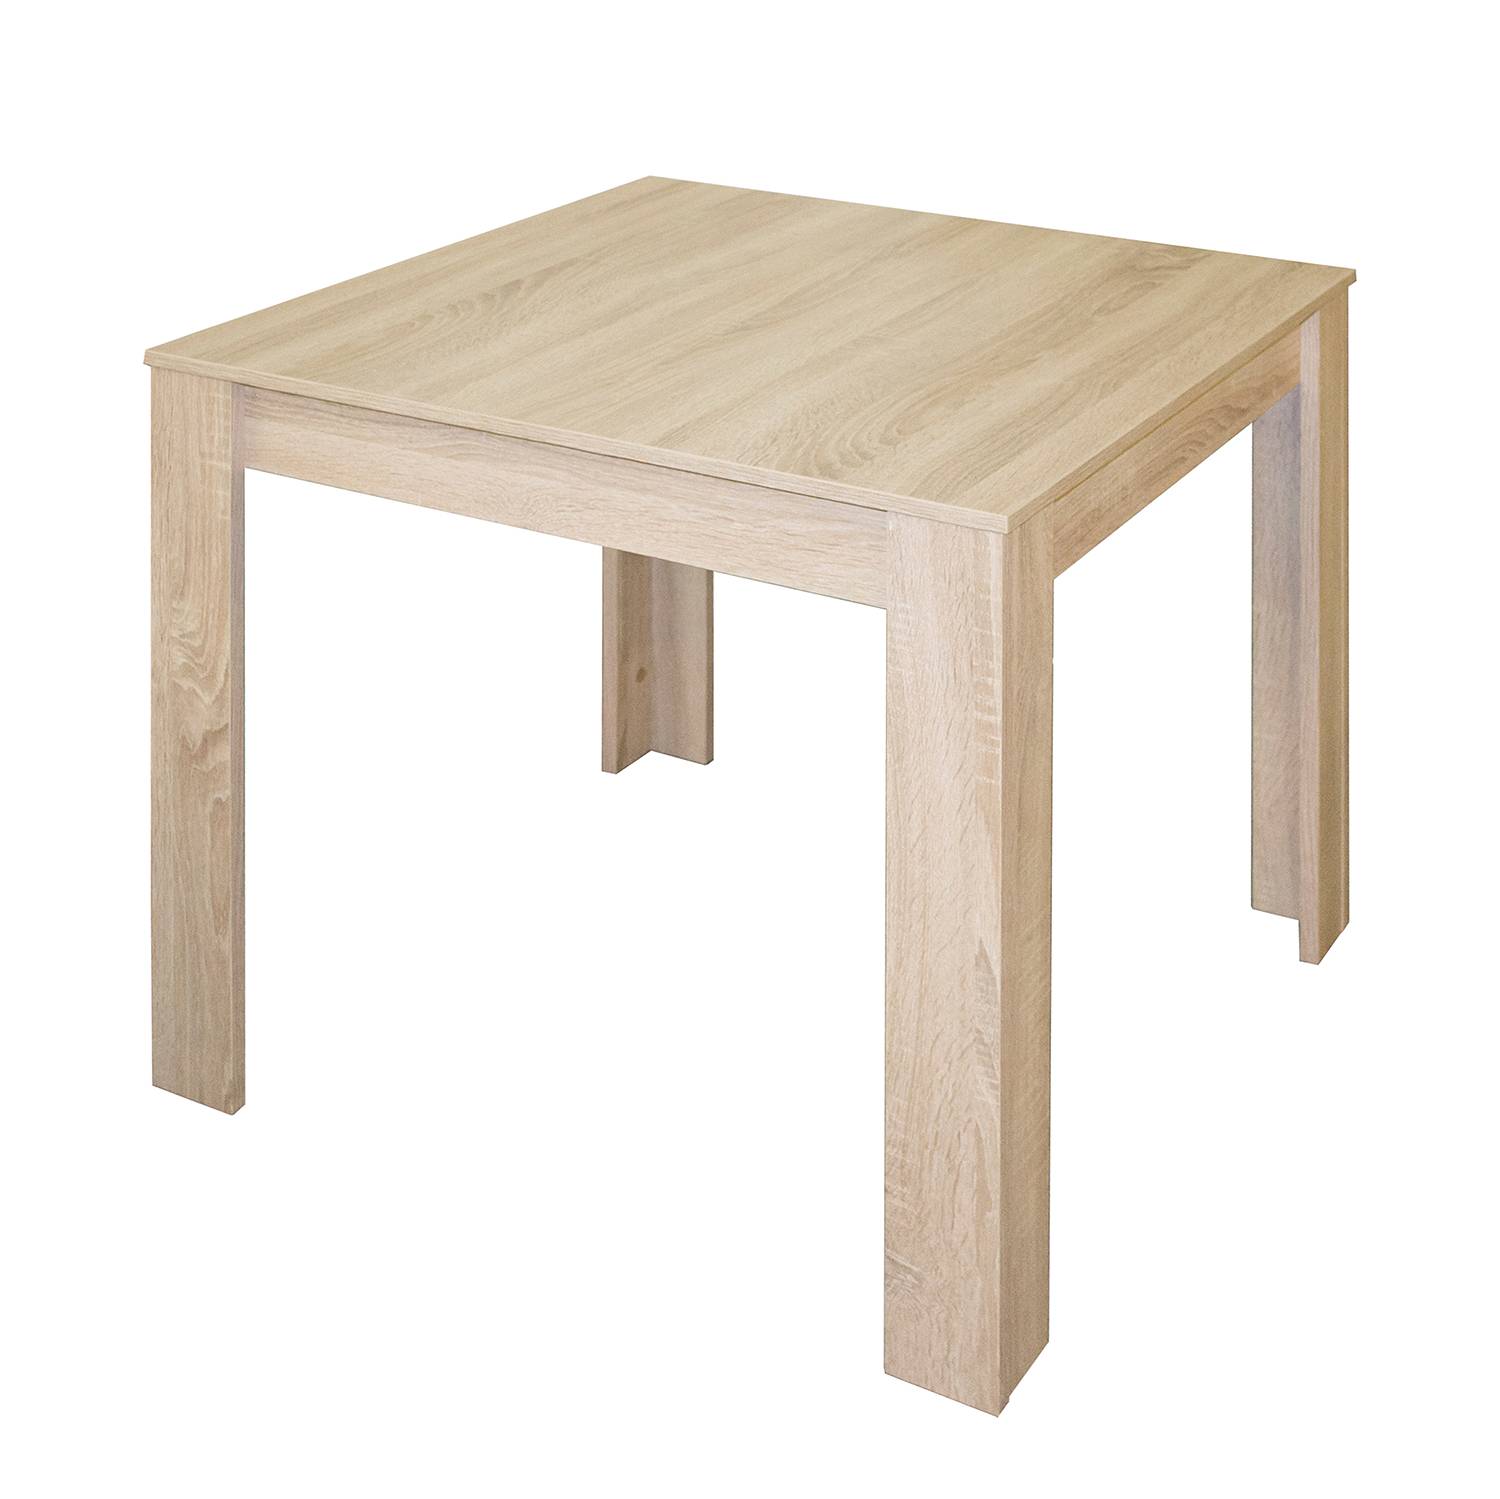 Image of Table Fairford 000000001000121319